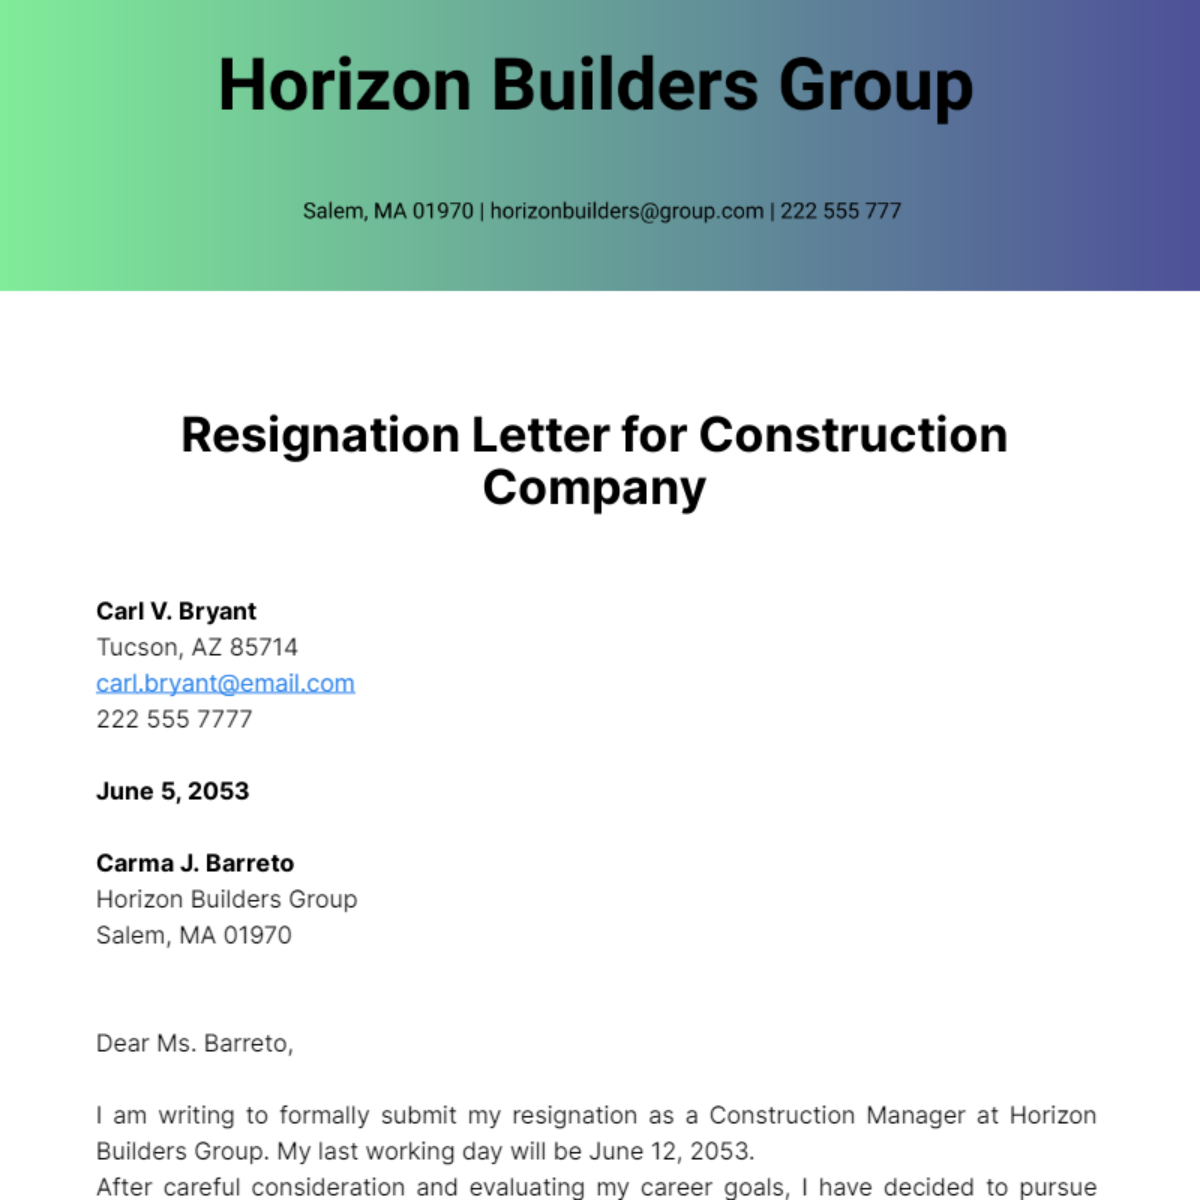 Resignation Letter for Construction Company Template